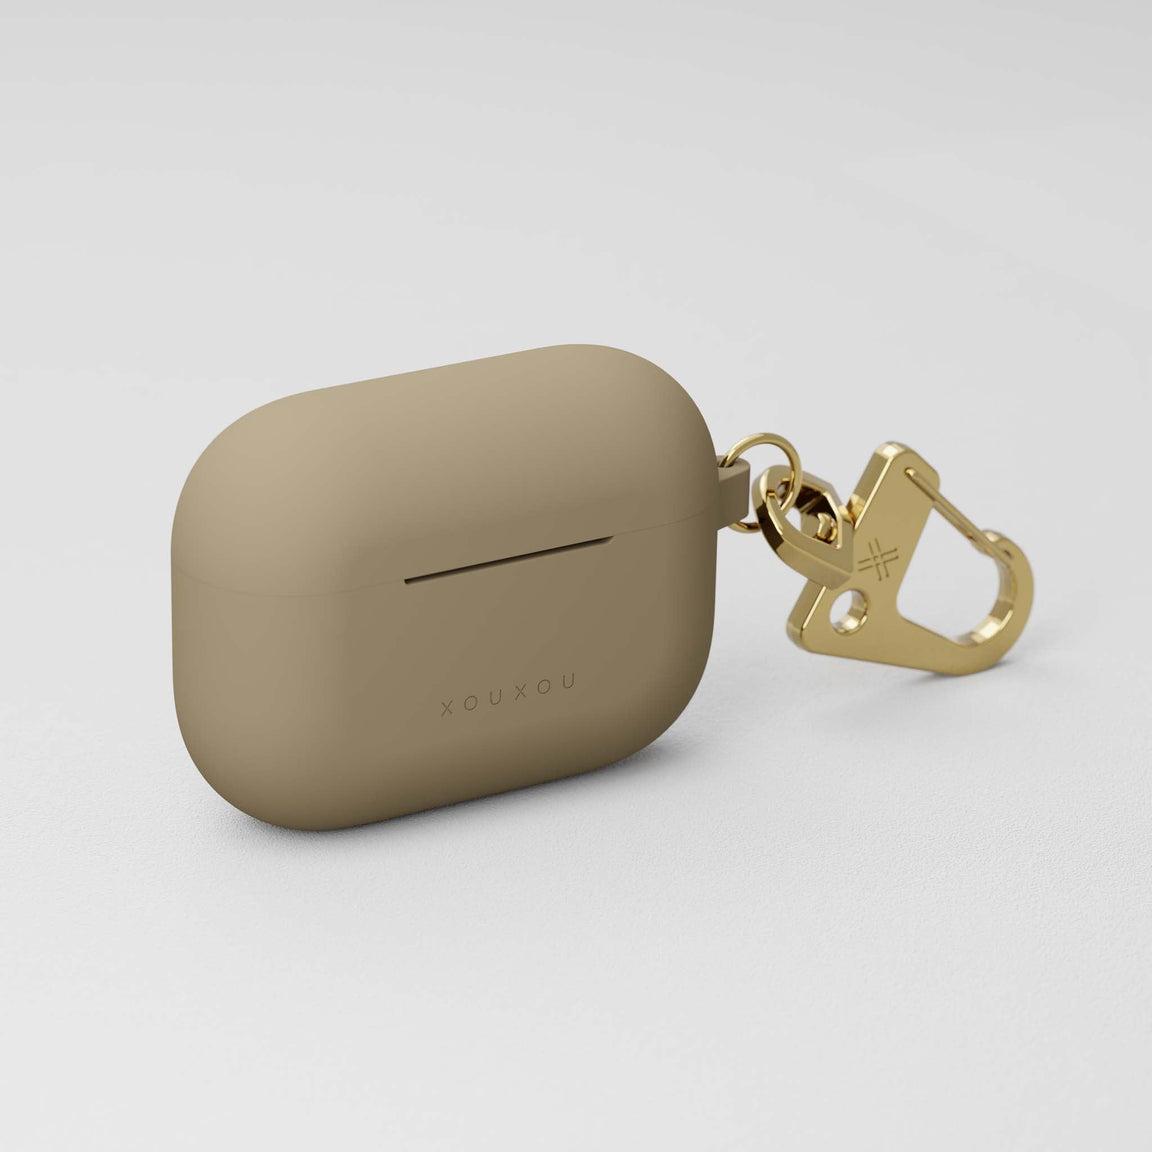 AirPods Pro case in Taupe (Beige) and golden metal carabiner | XOUXOU